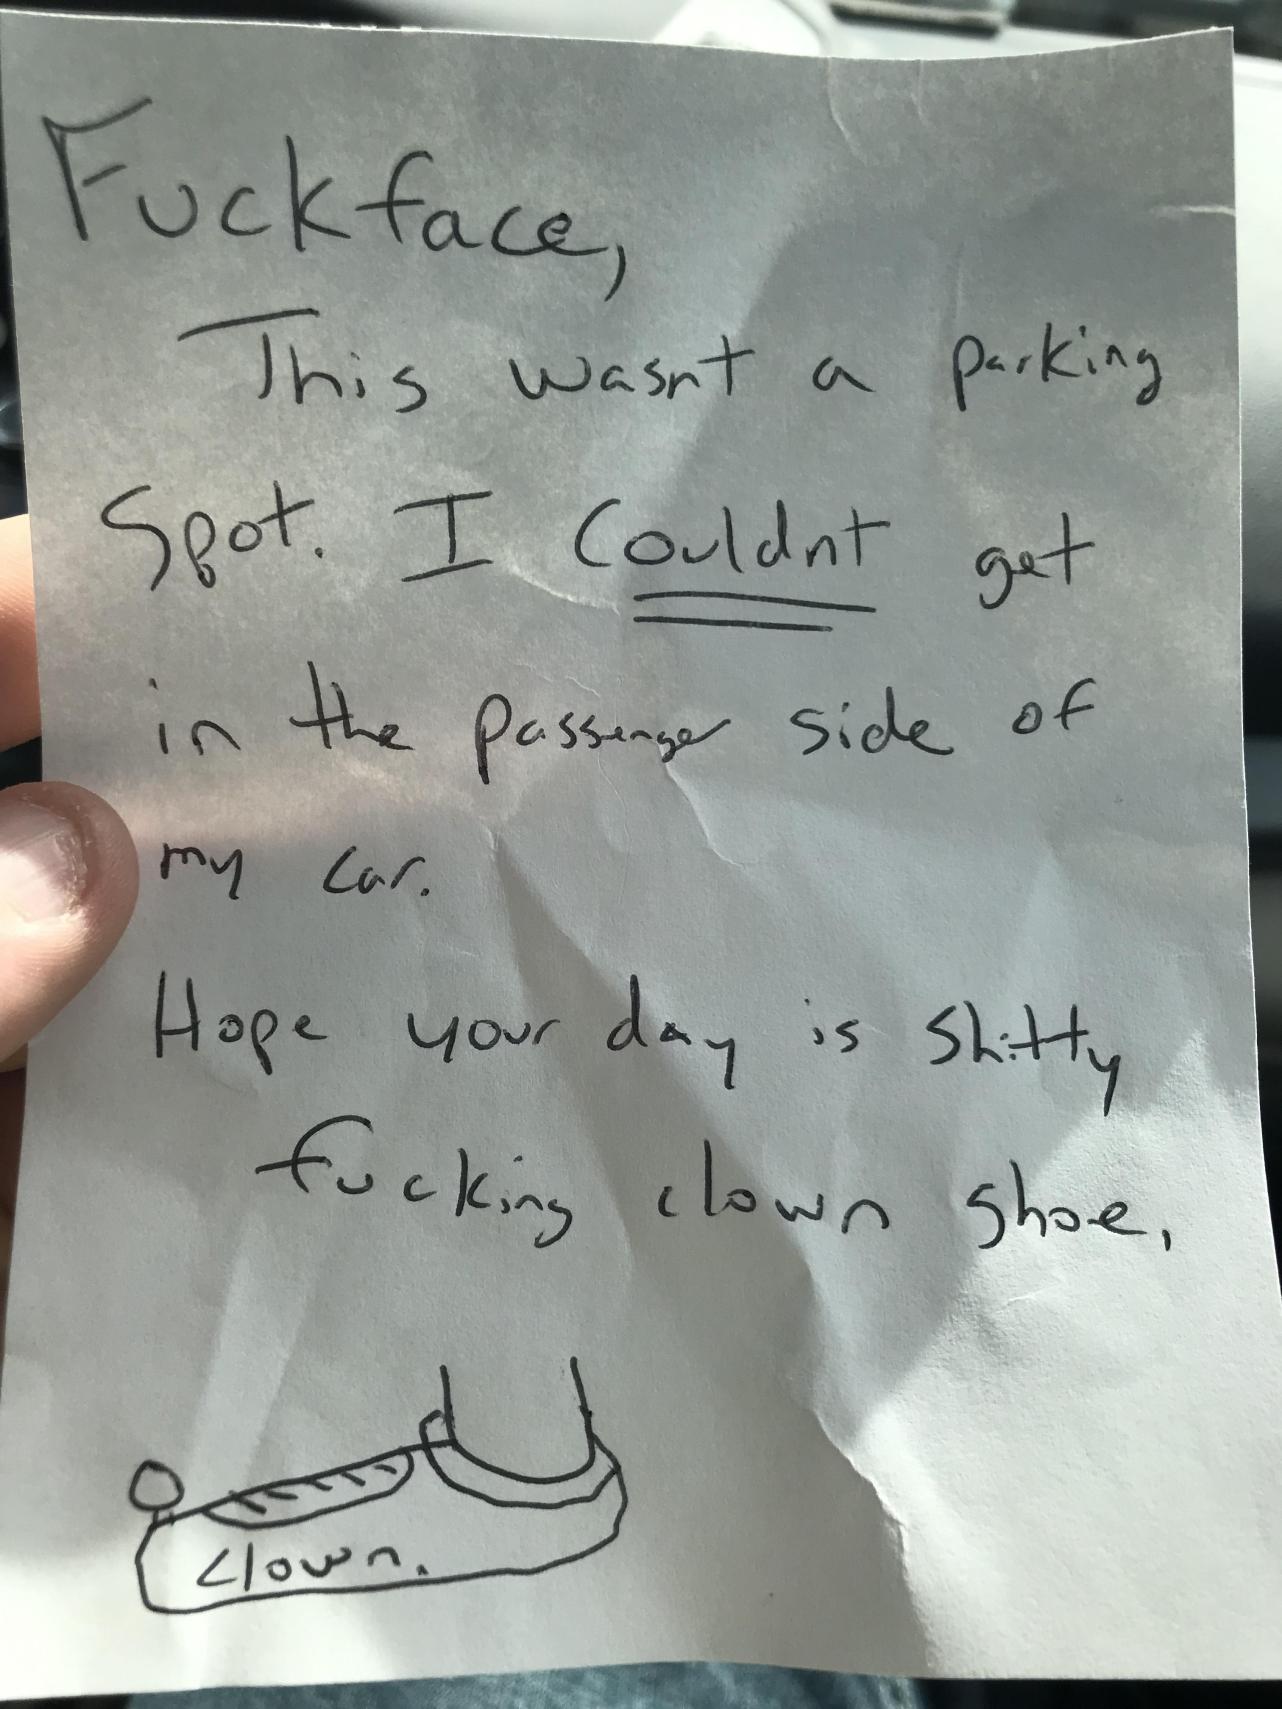 savage insults - handwriting - Fuckface, This wasnt a parking Spot. I Couldnt get in the passenger side of my car. Hope your day is Shitty fucking clown shoe, of 4lown.